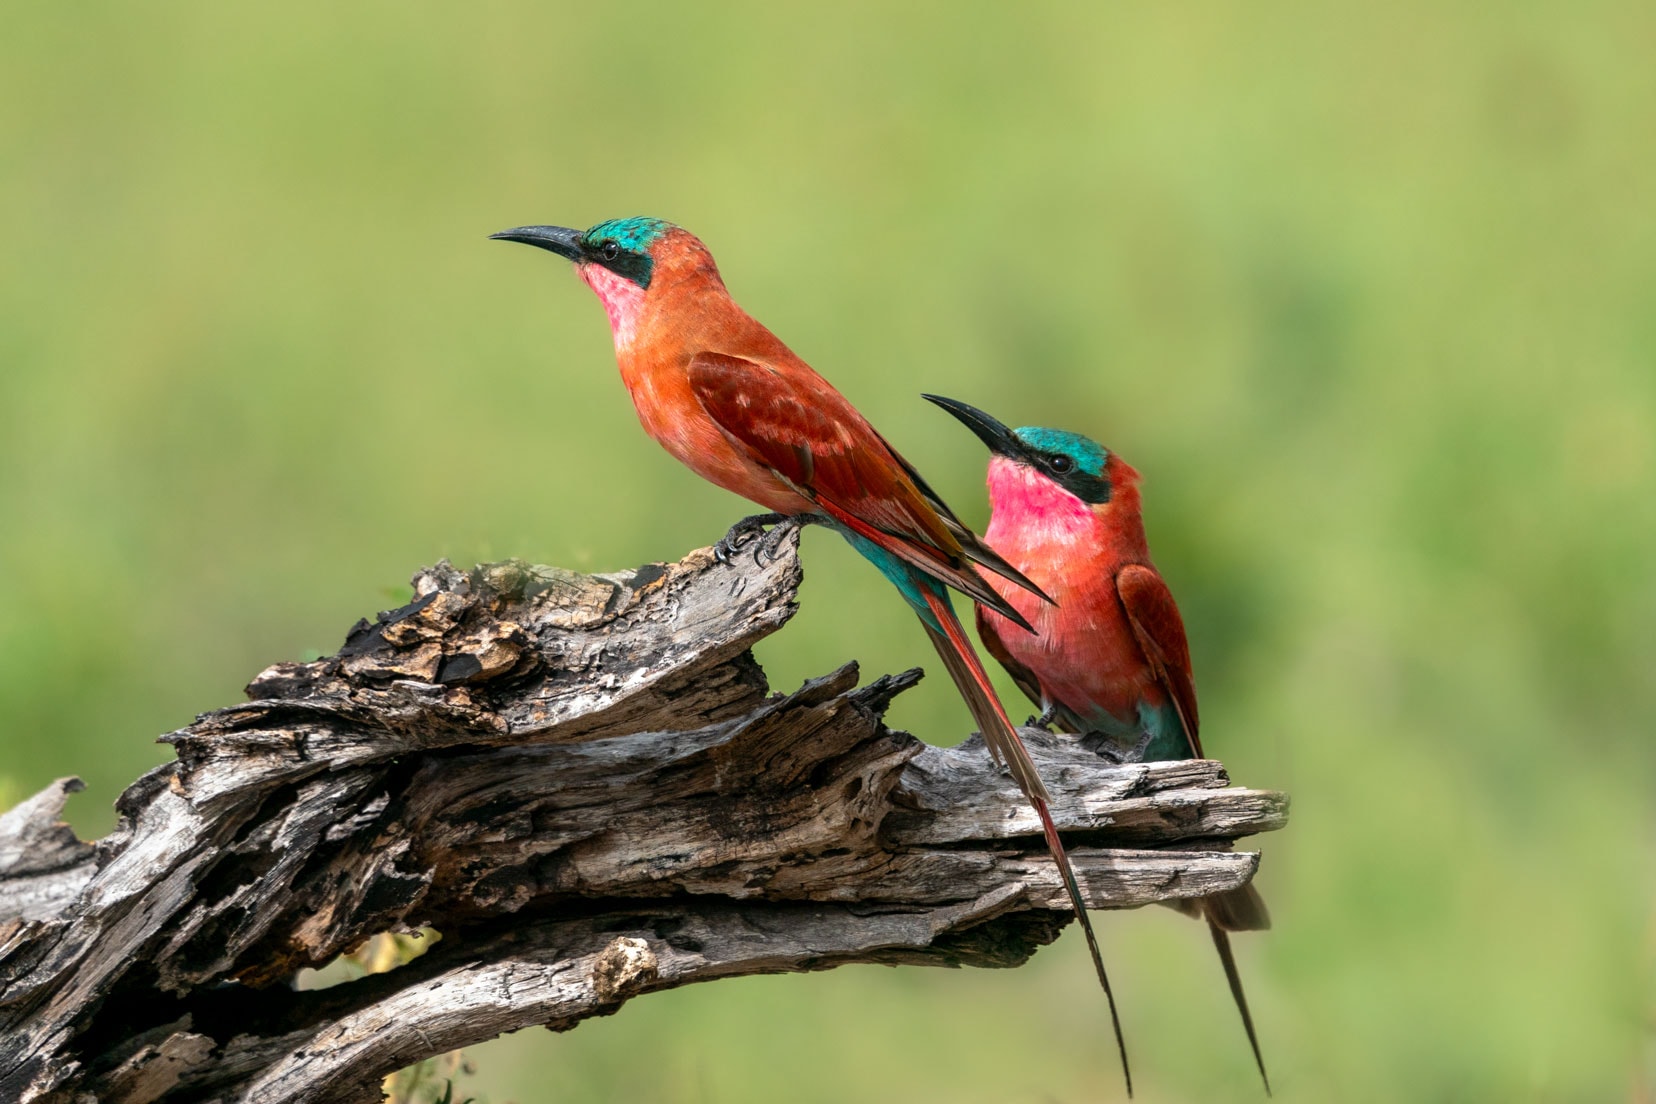 Two southern carmine bee-eaters sat on a log